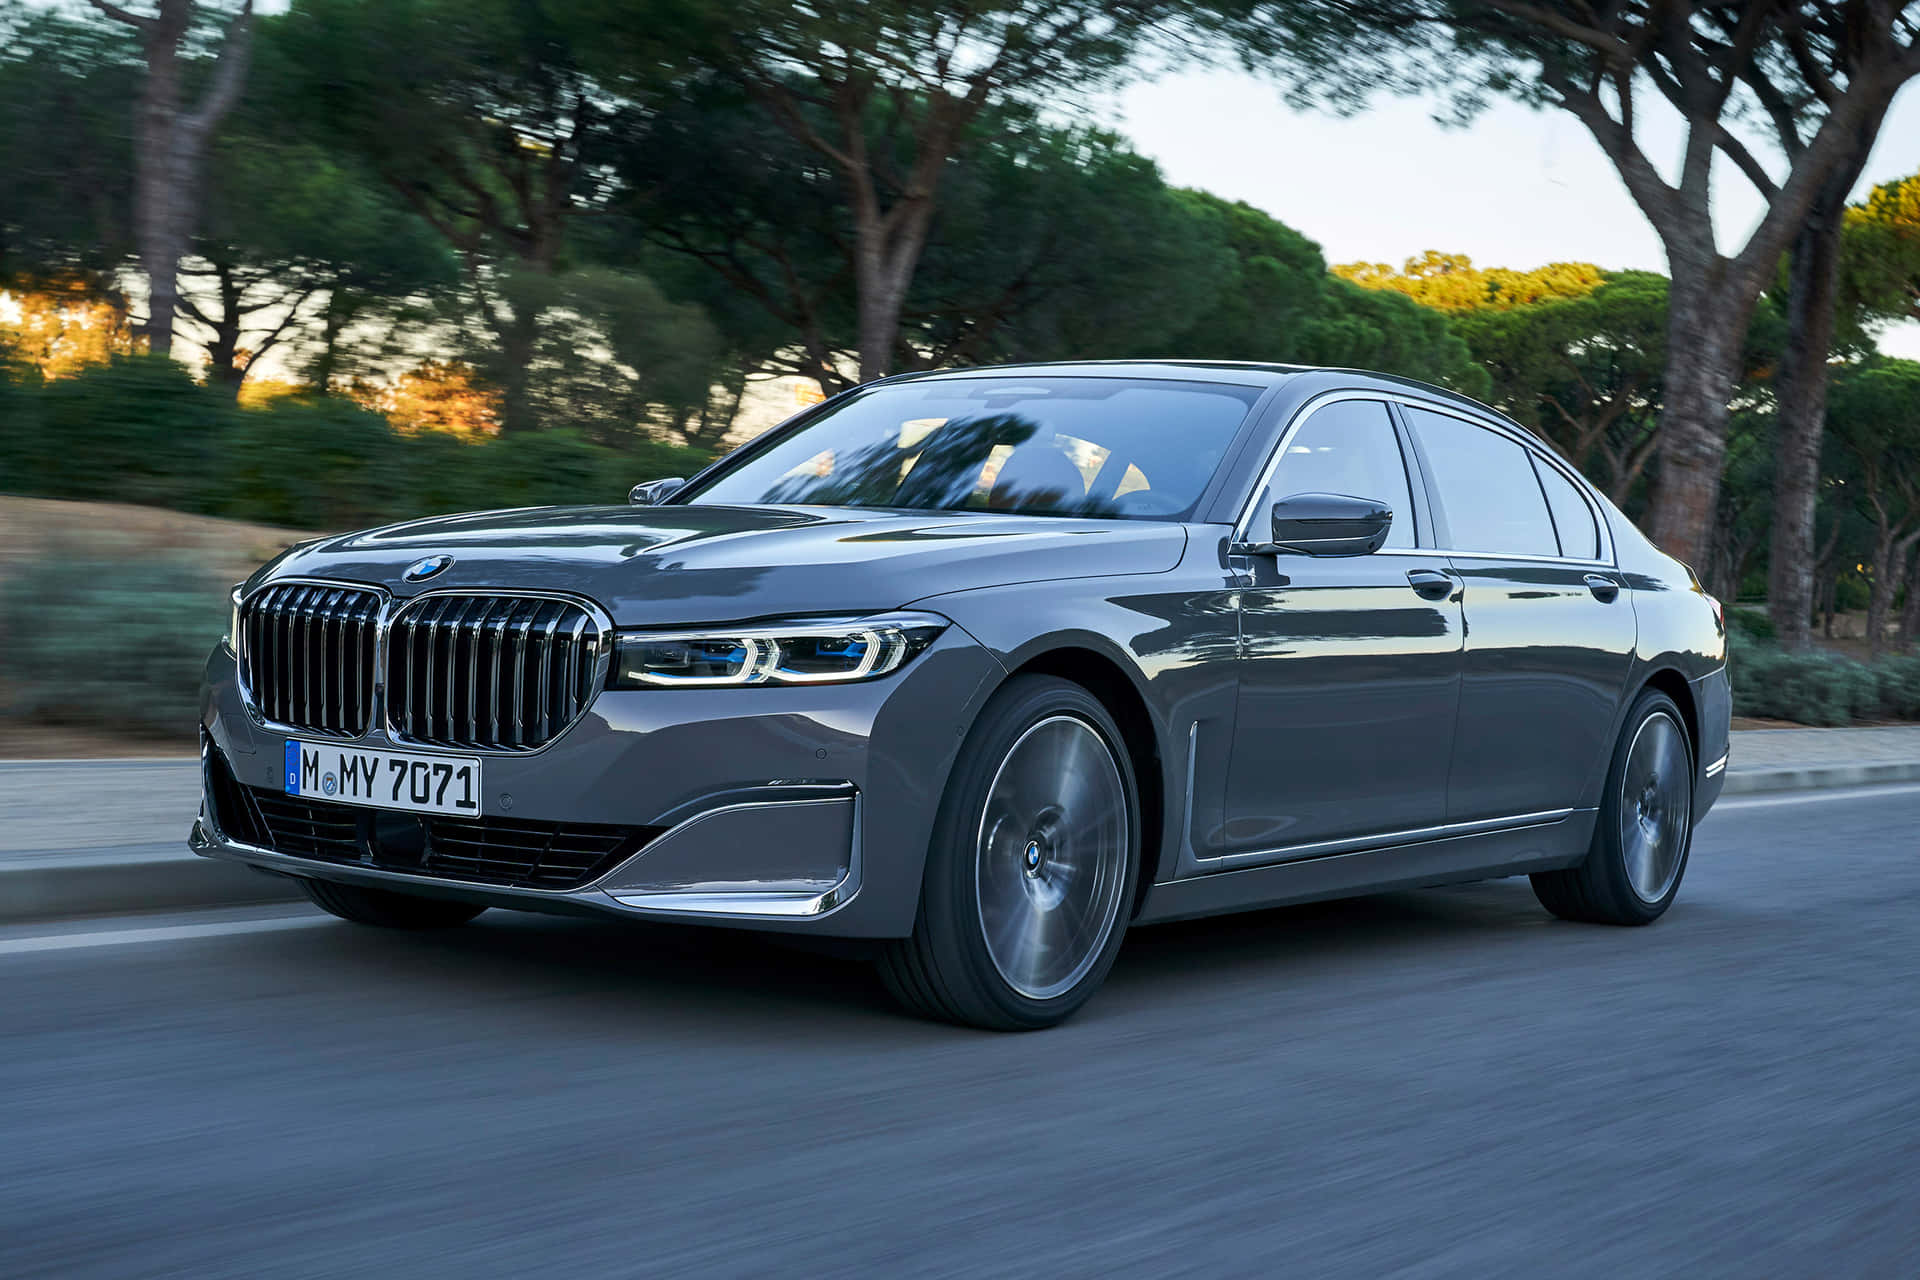 Captivating BMW 7 Series in Luxury Grayscale Wallpaper